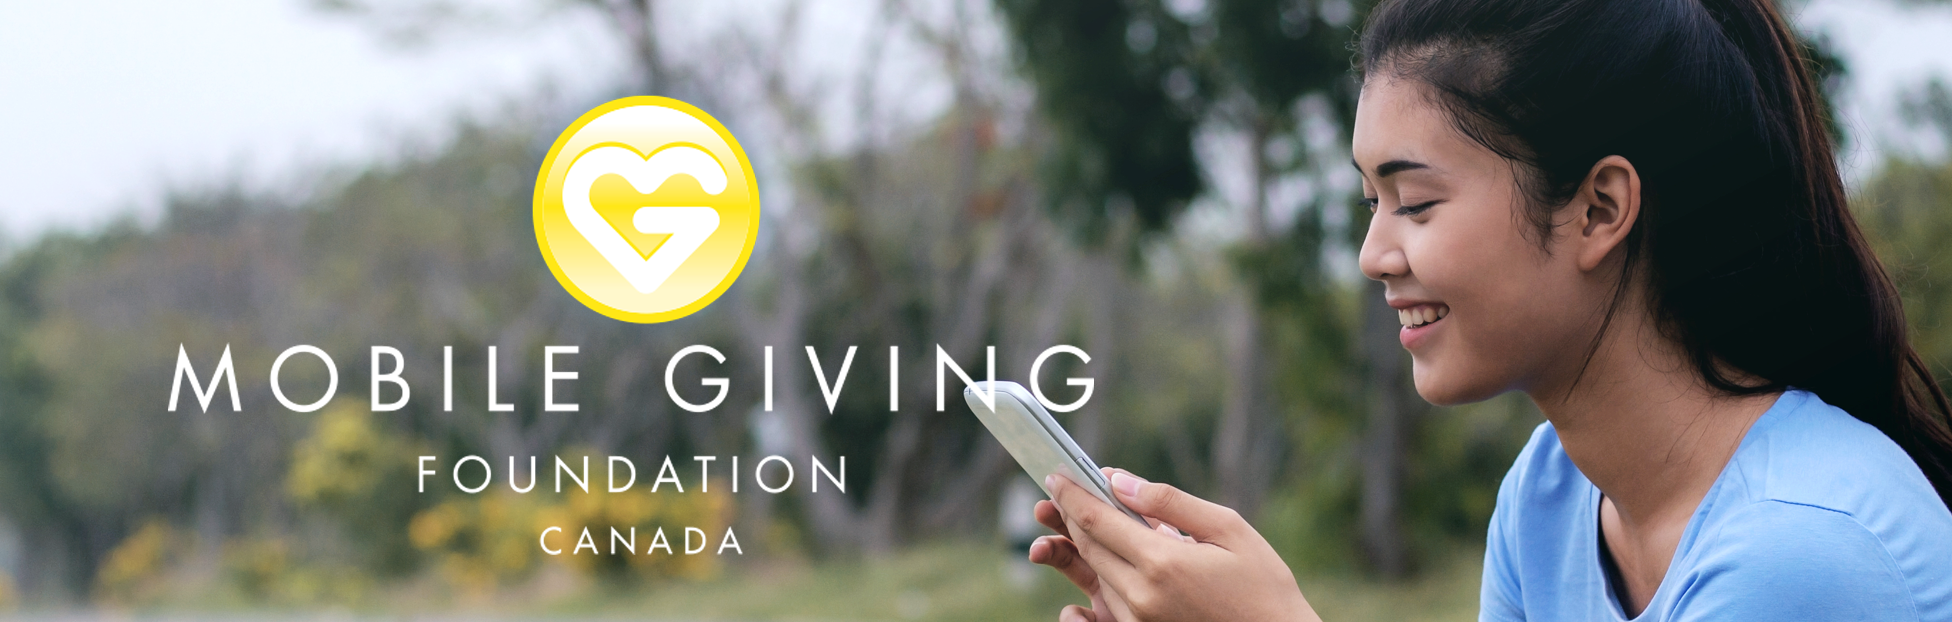 MOBILE GIVING FOUNDATION CANADA